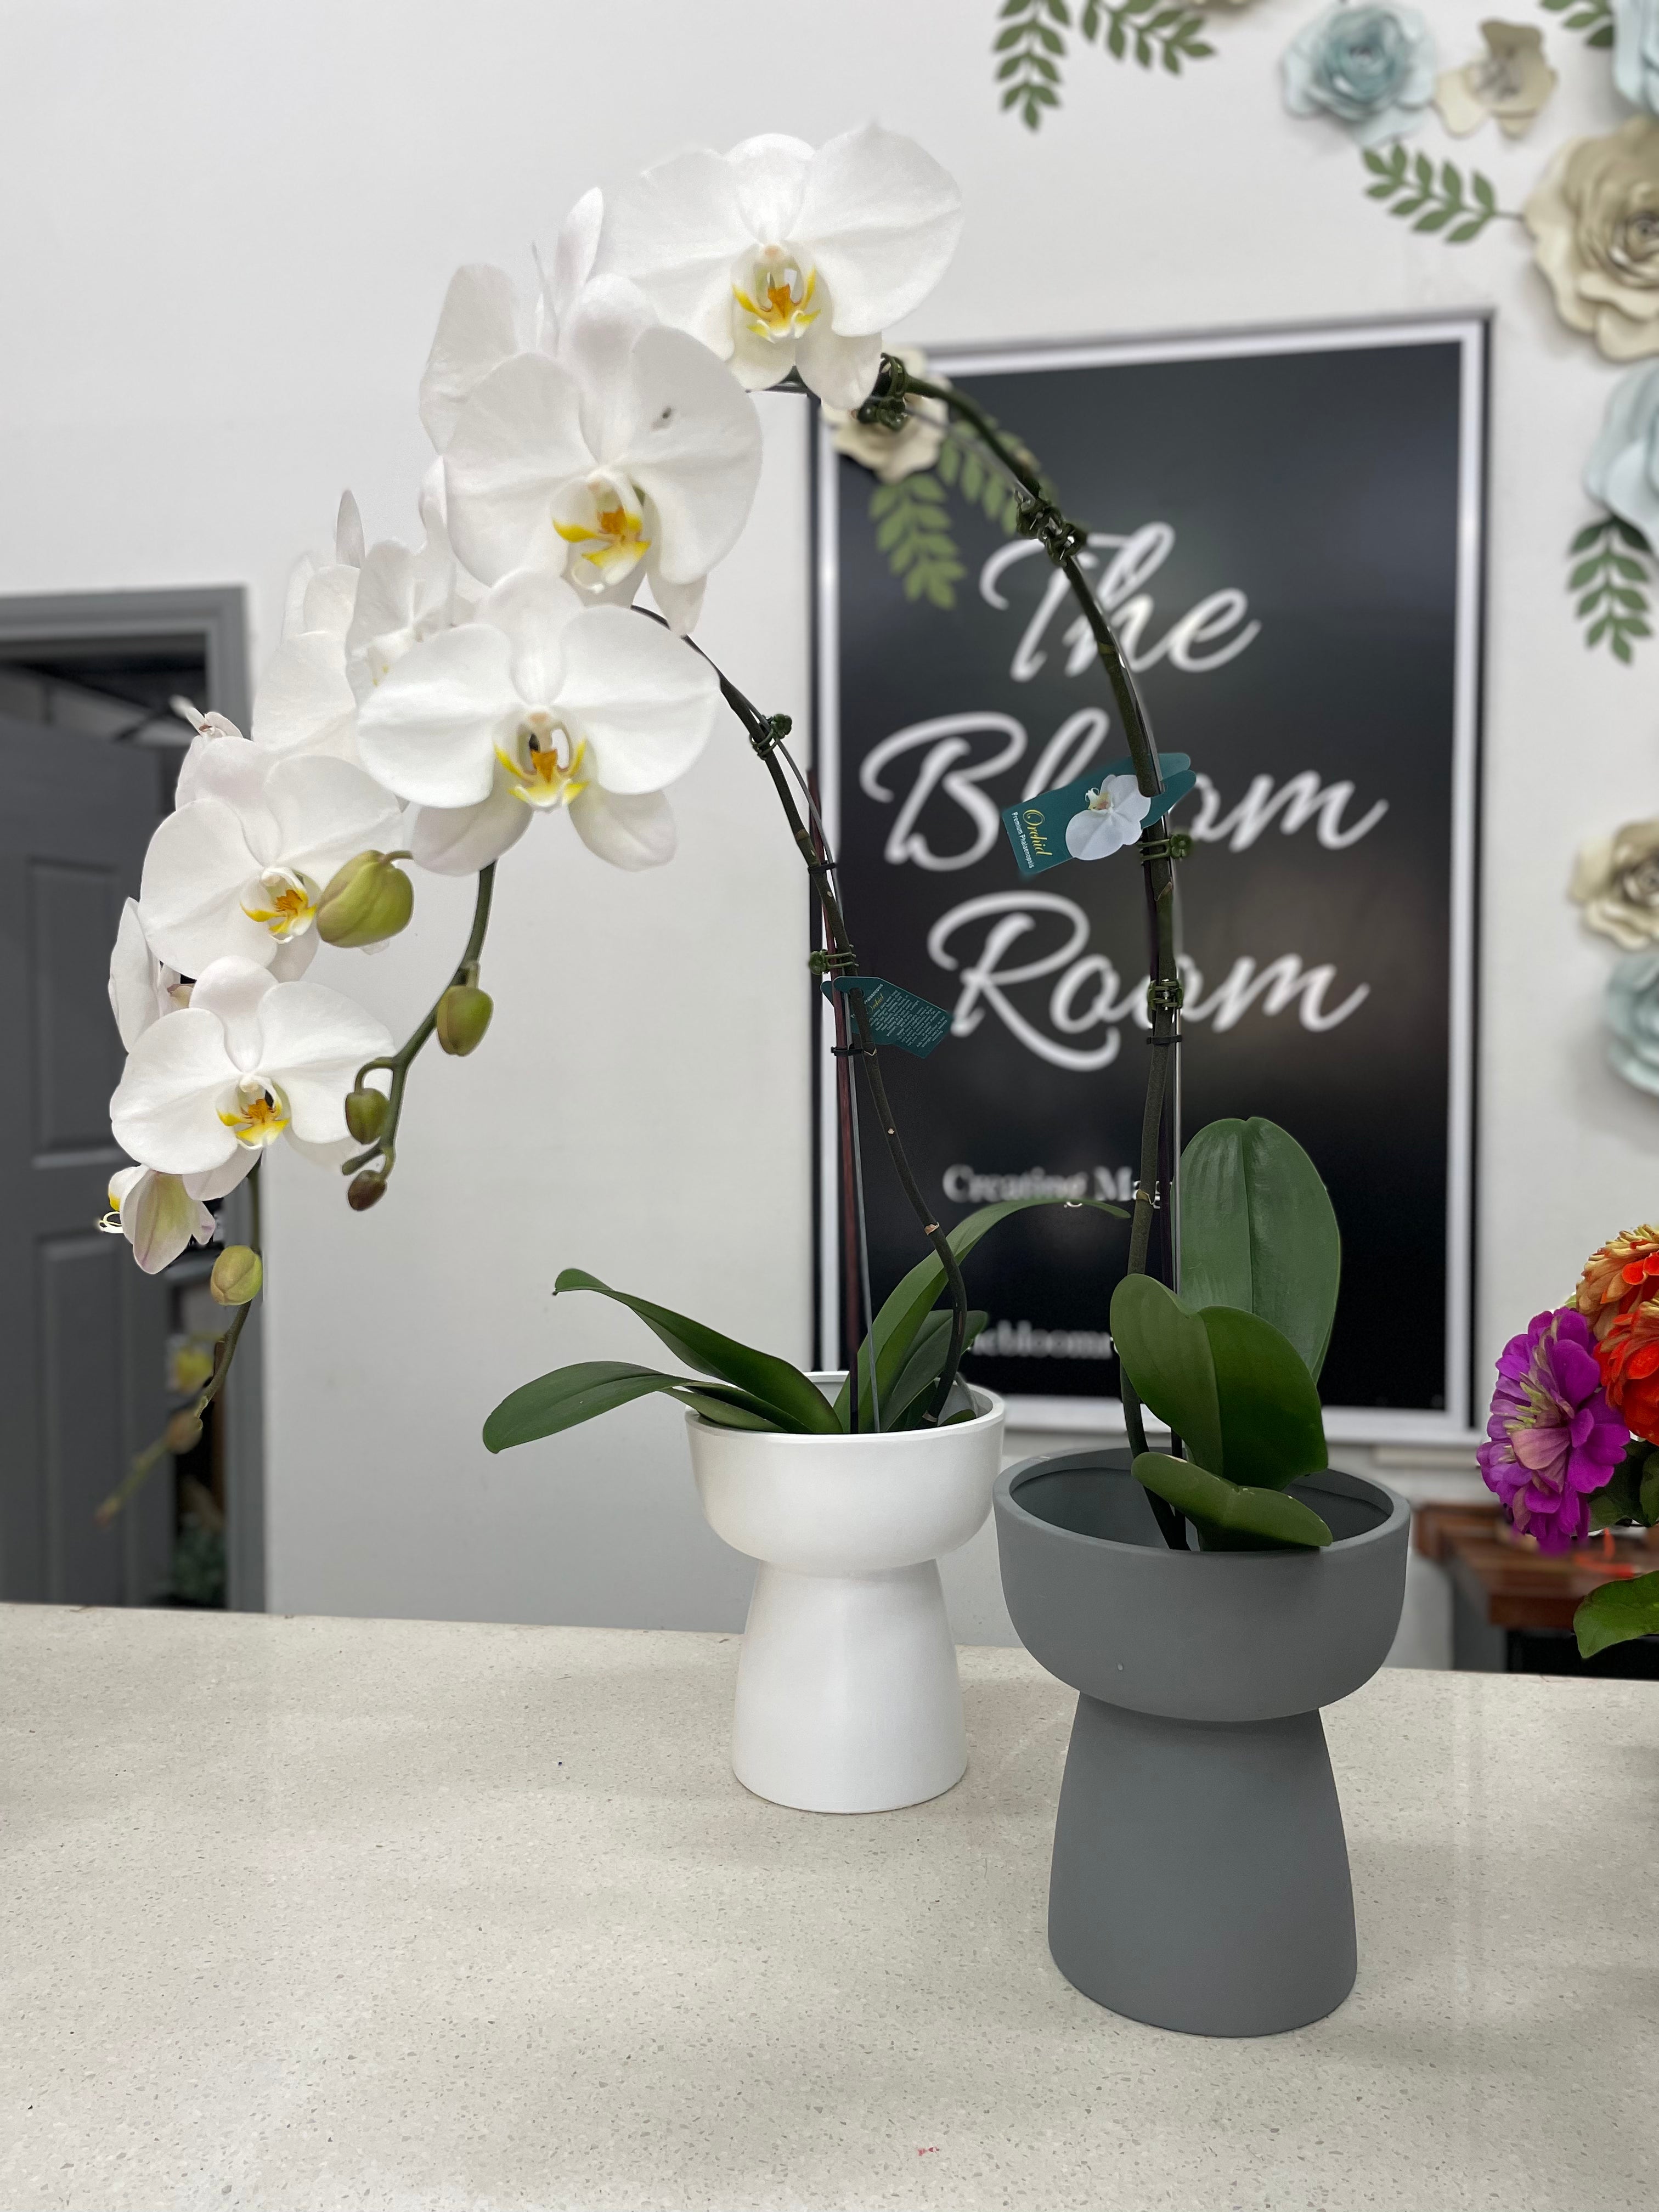 The Single Orchid in a Pot - The Bloom Room 